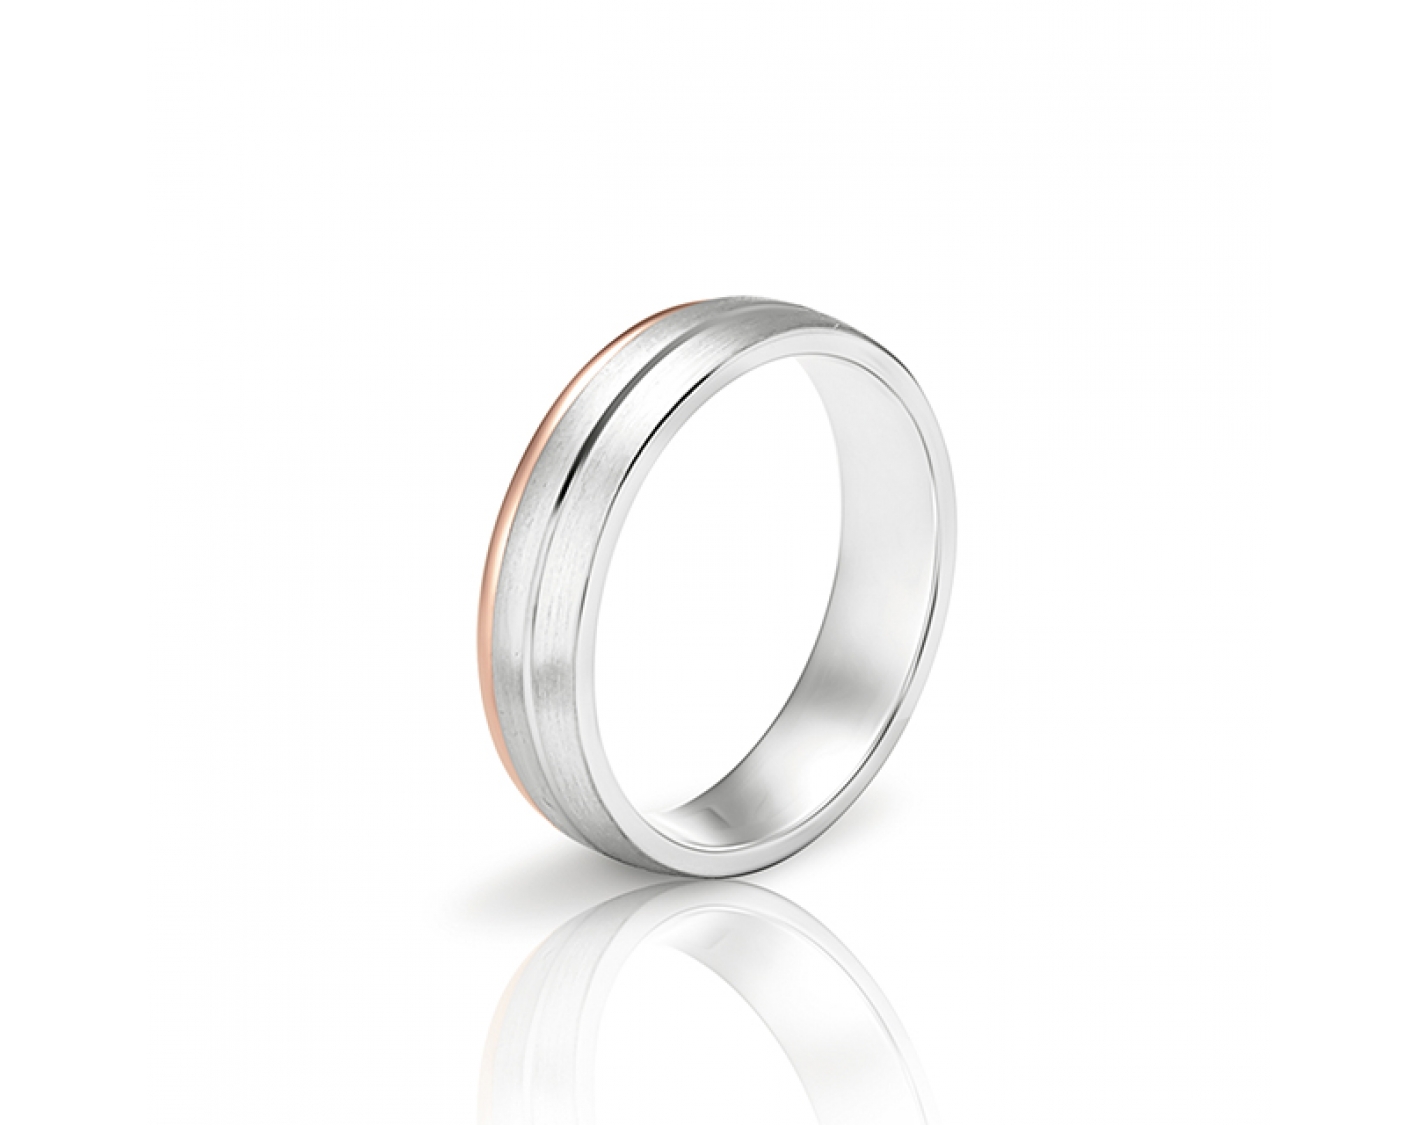 dual-tone 5mm two-toned* wedding band Photos & images